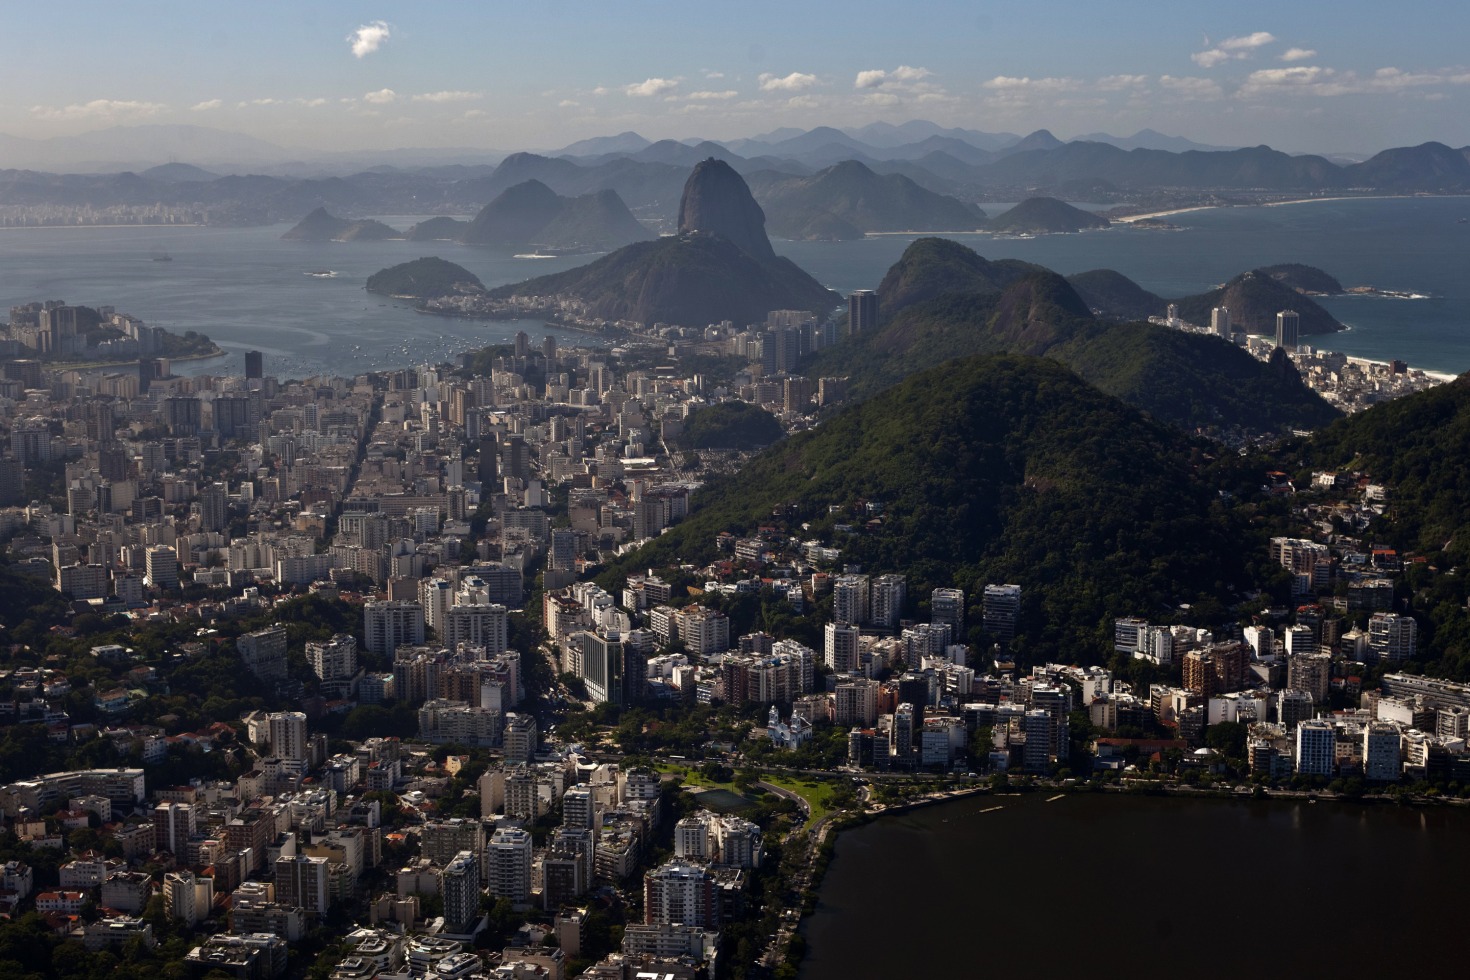 Guanabara Bay is seen in this aerial photograph of Rio de Janeiro.